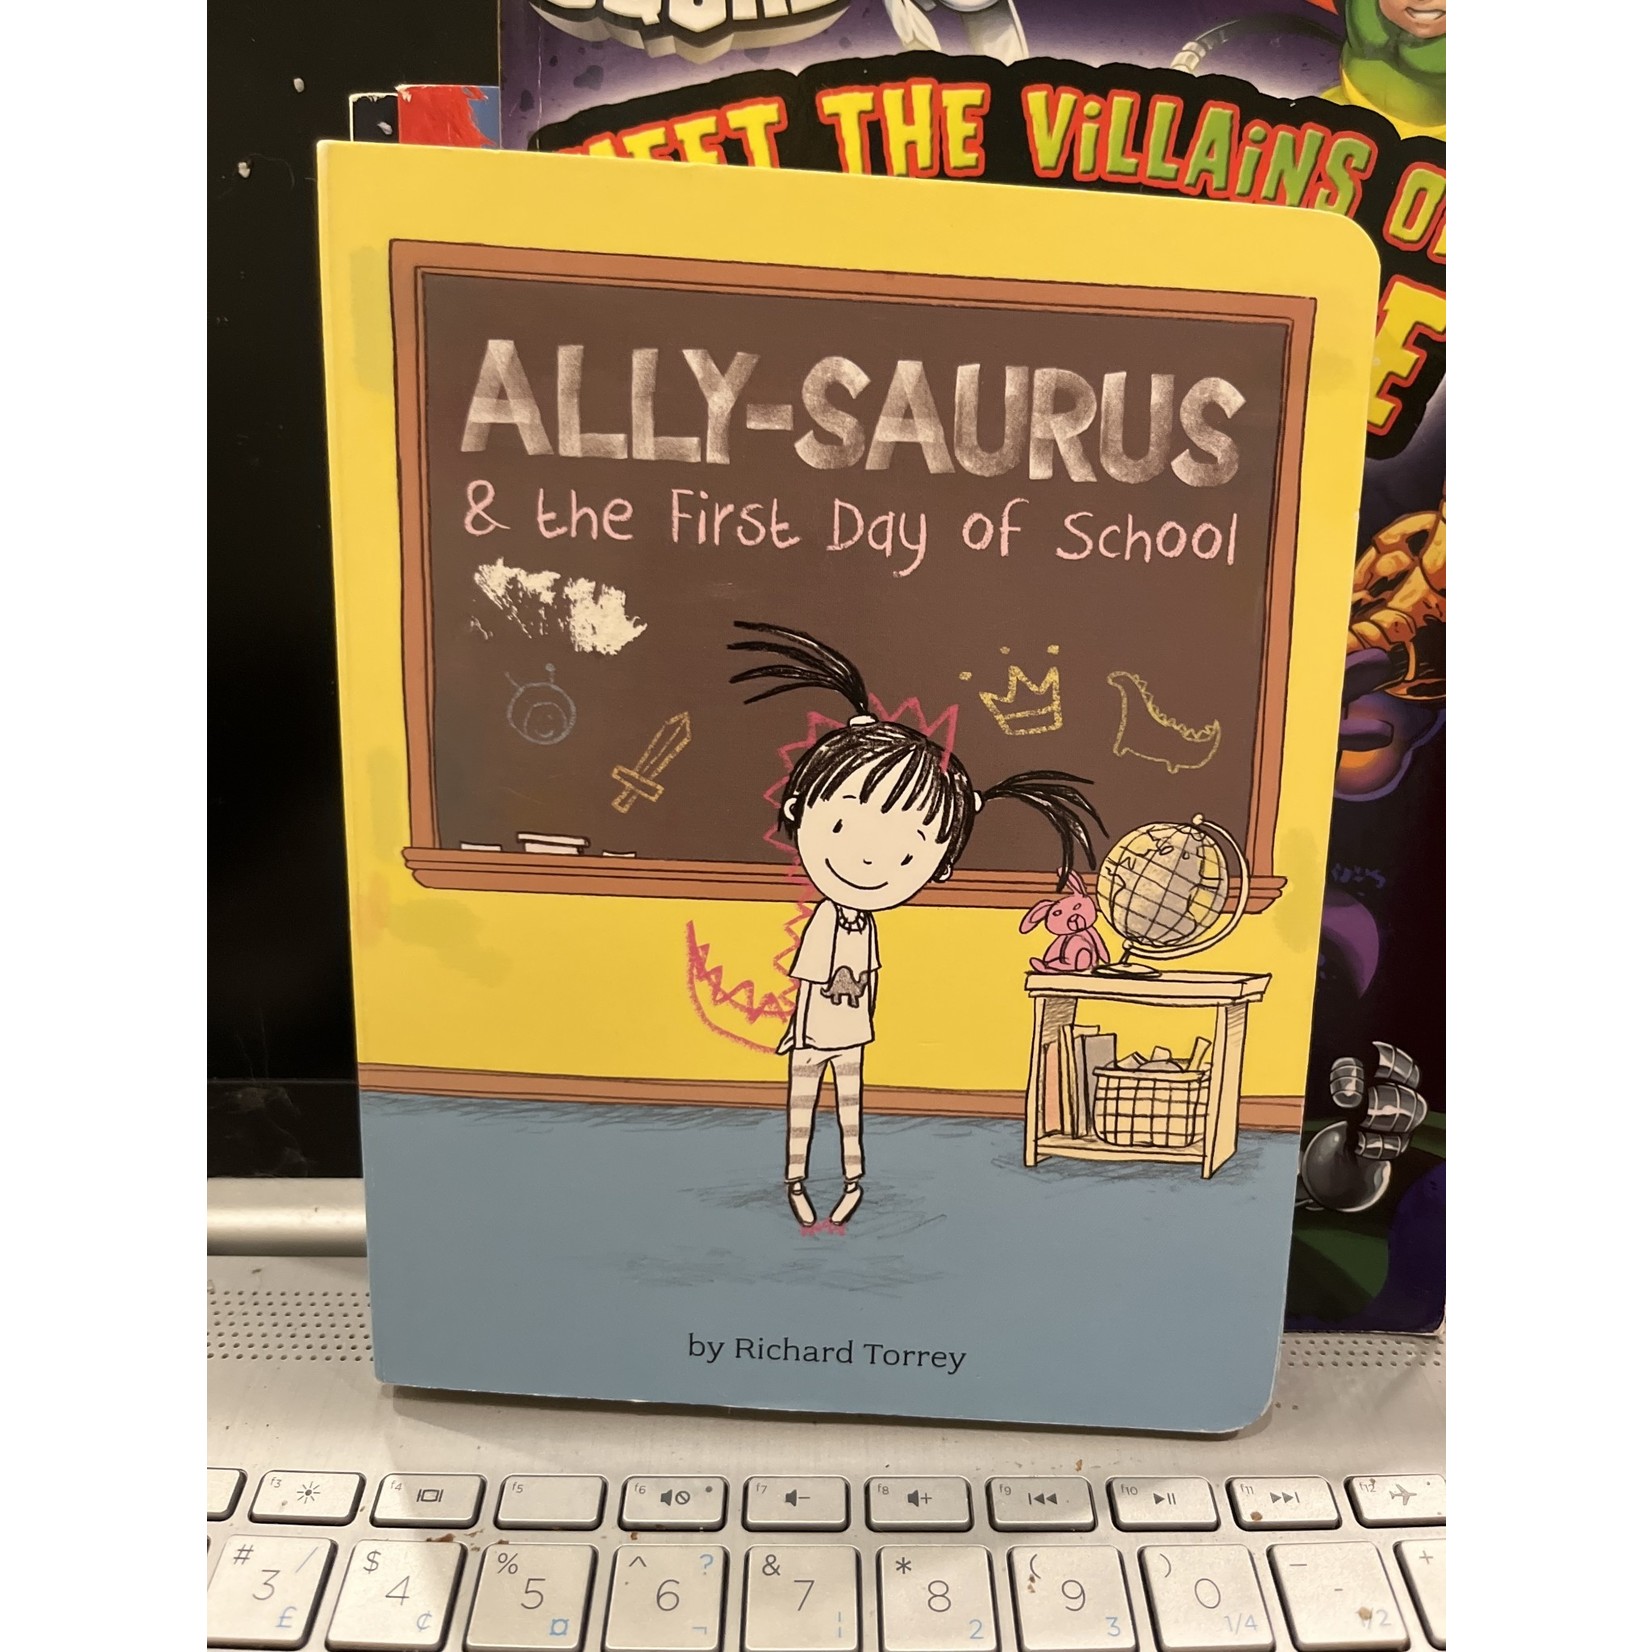 Ally-Saurus & the First Day of School